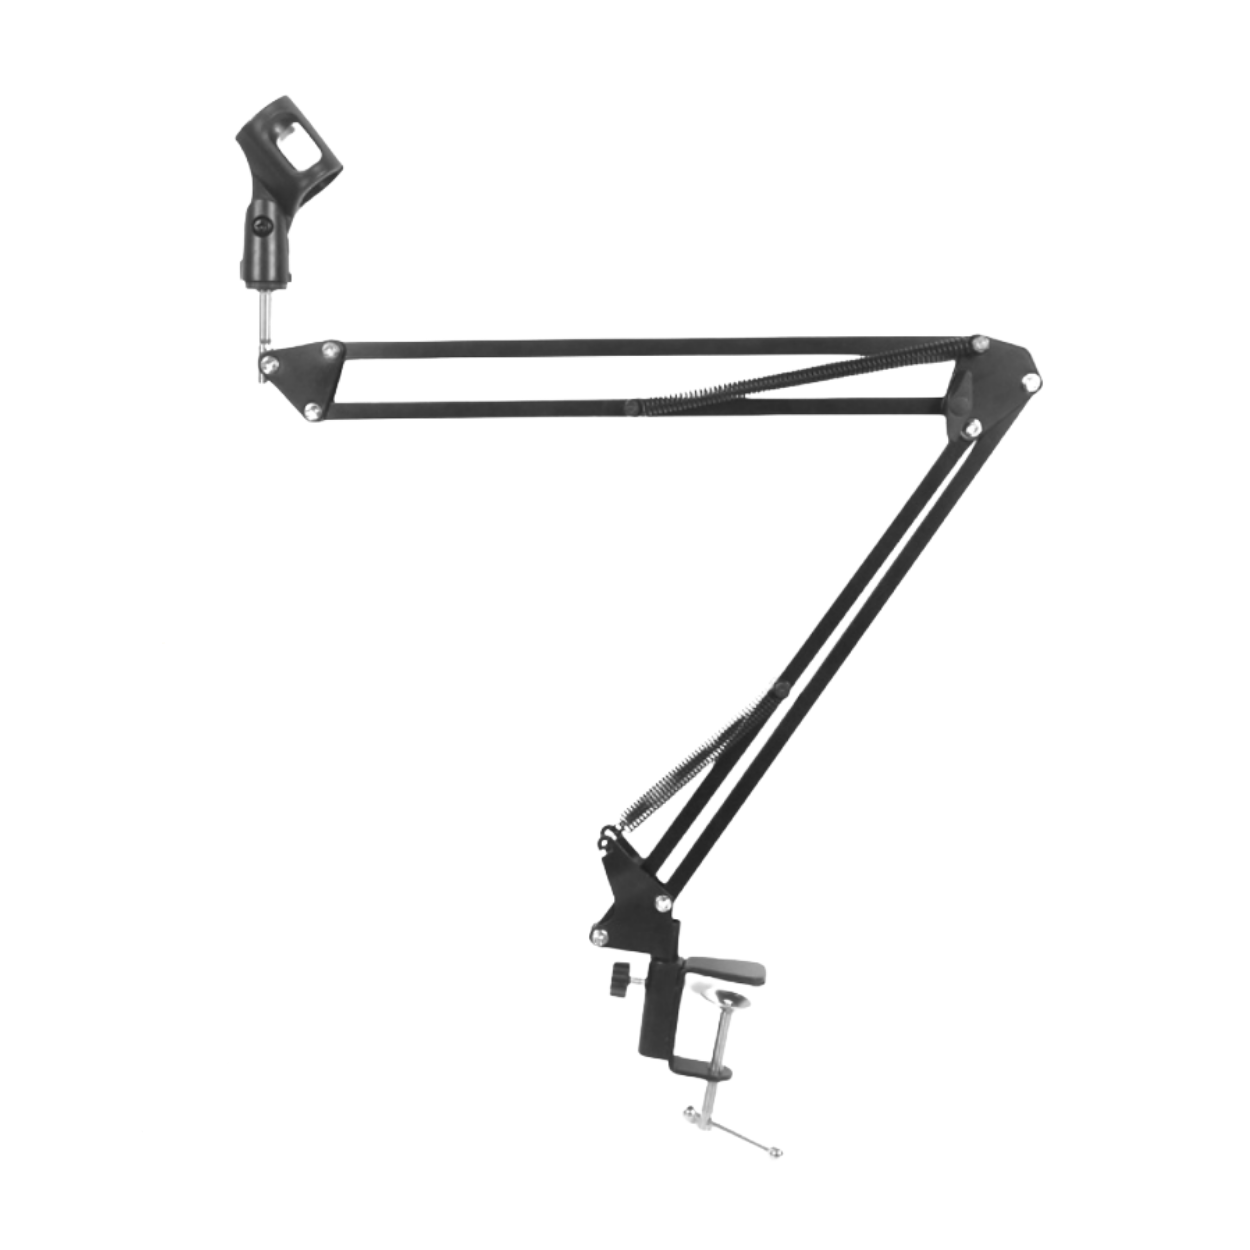 NEOWOOD 37A TABLE ARM MICROPHONE STAND, NEOWOOD, STAND, neowood-stand-neo-37a, ZOSO MUSIC SDN BHD